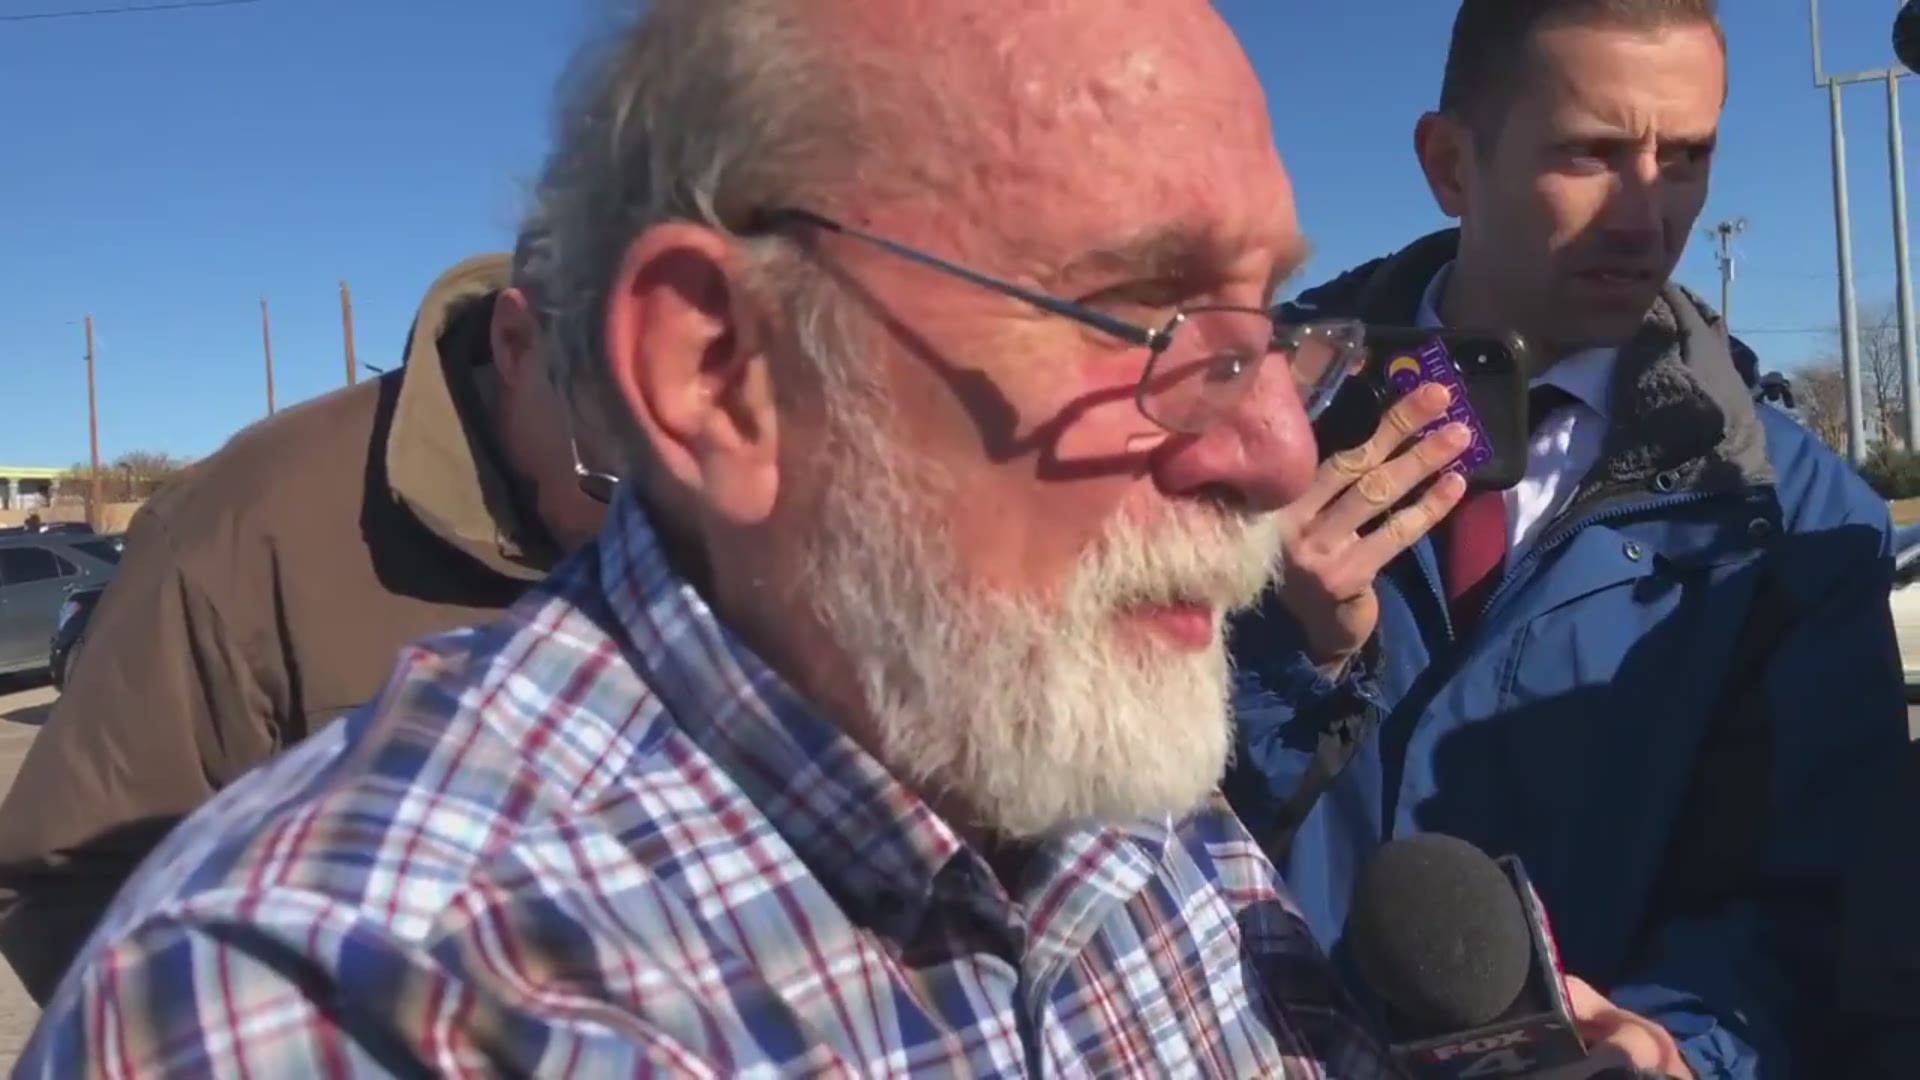 John Richardson is a longtime member of West Freeway Church of Christ in White Settlement, Texas. Two people died and one was critically injured in a shooting there.